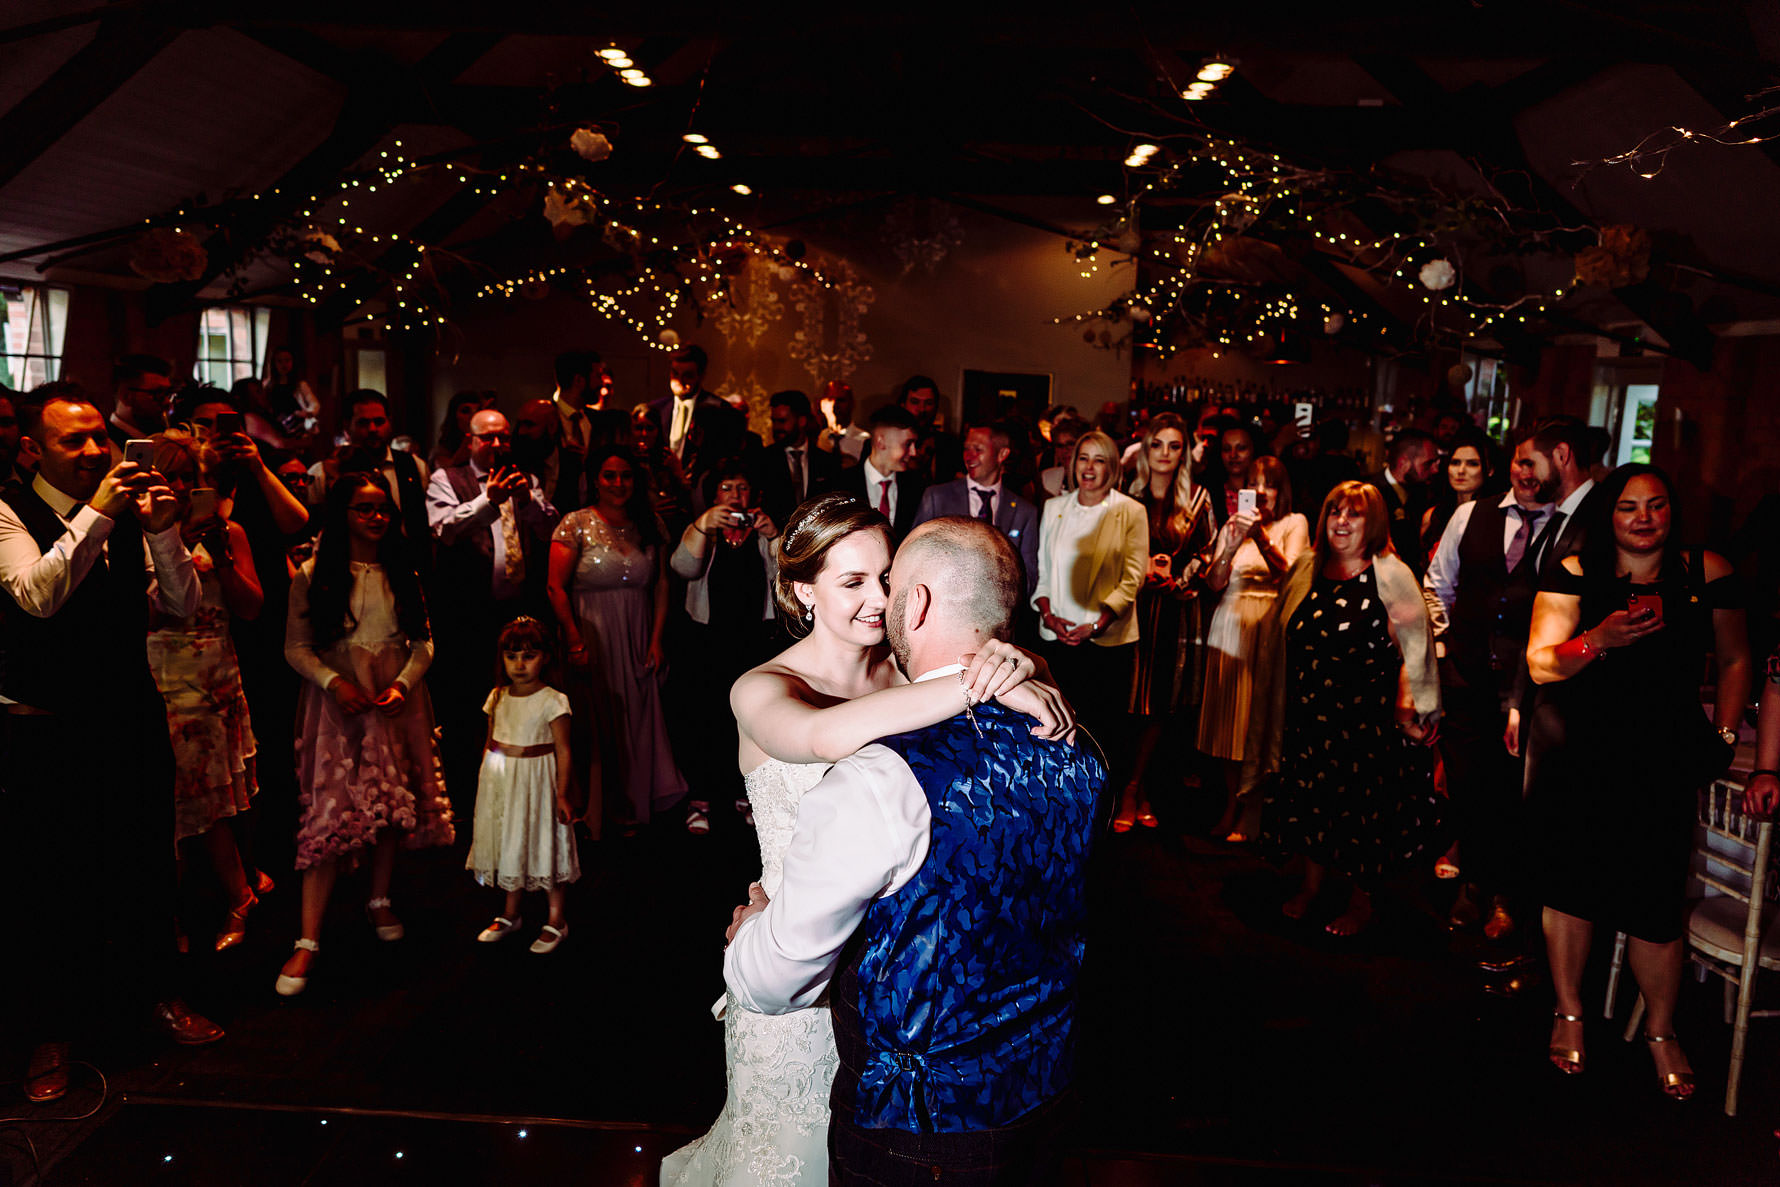 wedding photography at gorcott hall by elliot w patching photography